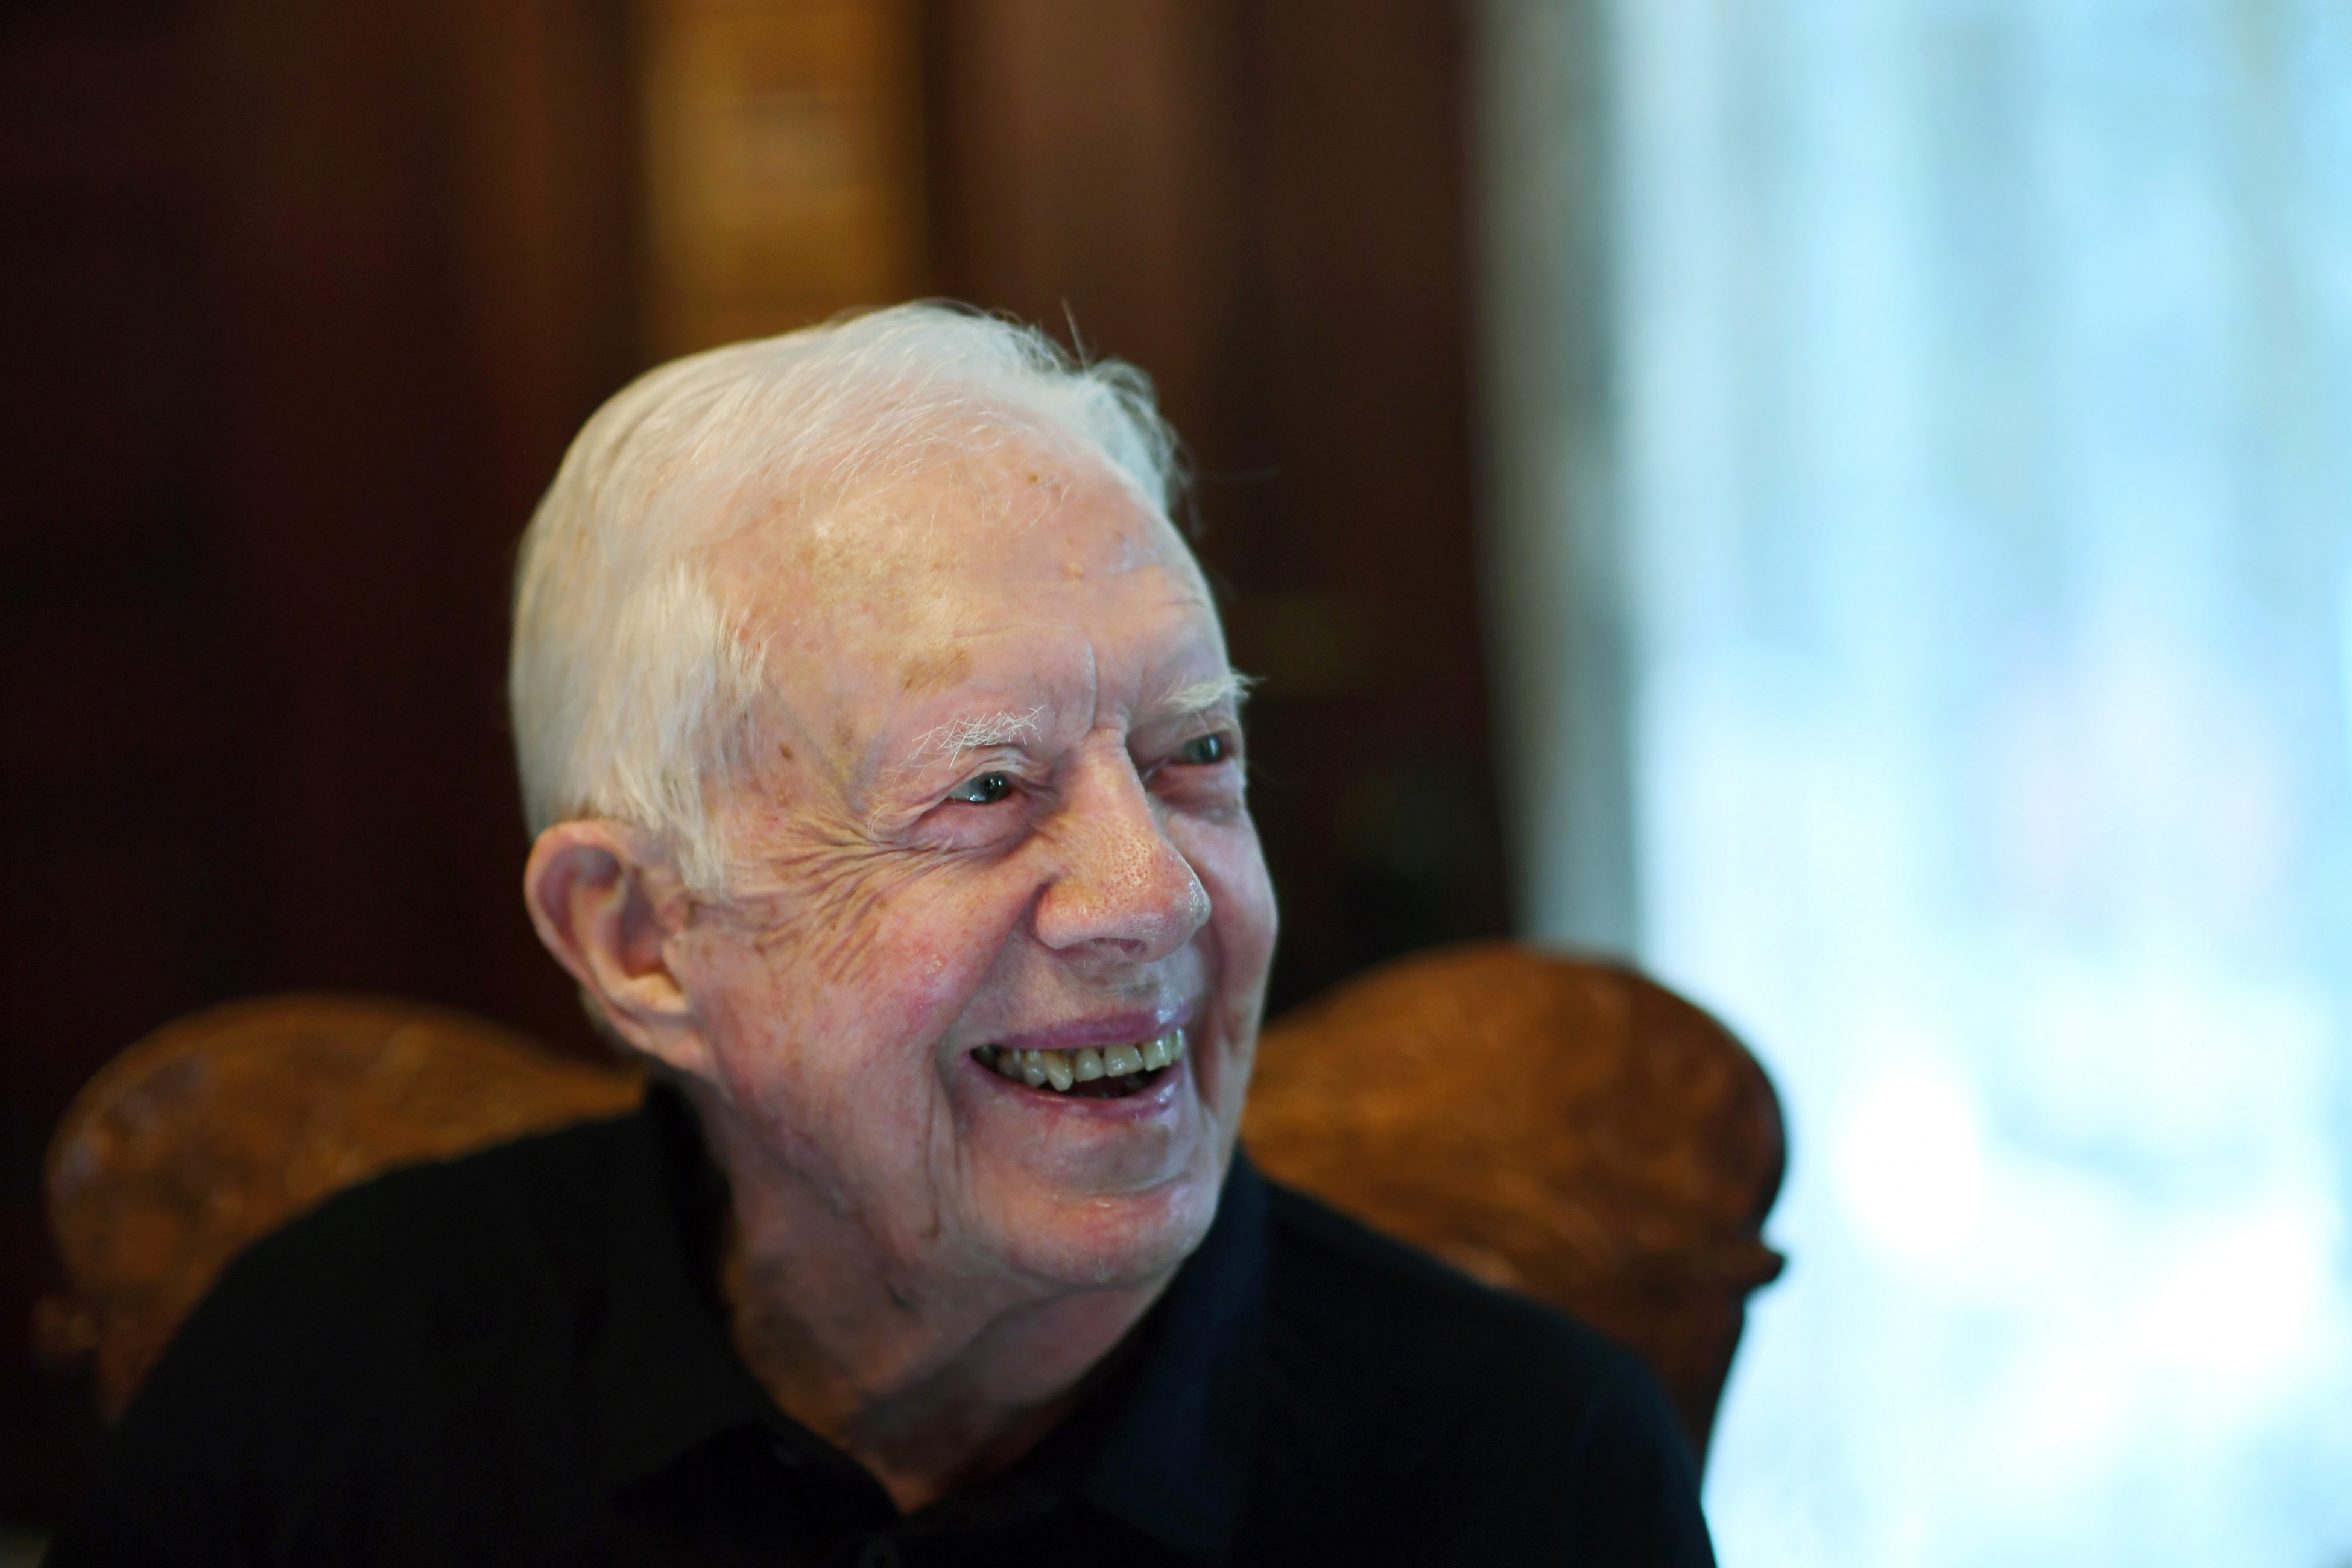 Jimmy Carter being interviewed by reporters at the home of friend, Jill Stuckey in Plains, Georgia, on August 4, 2018. | Source: Getty Images